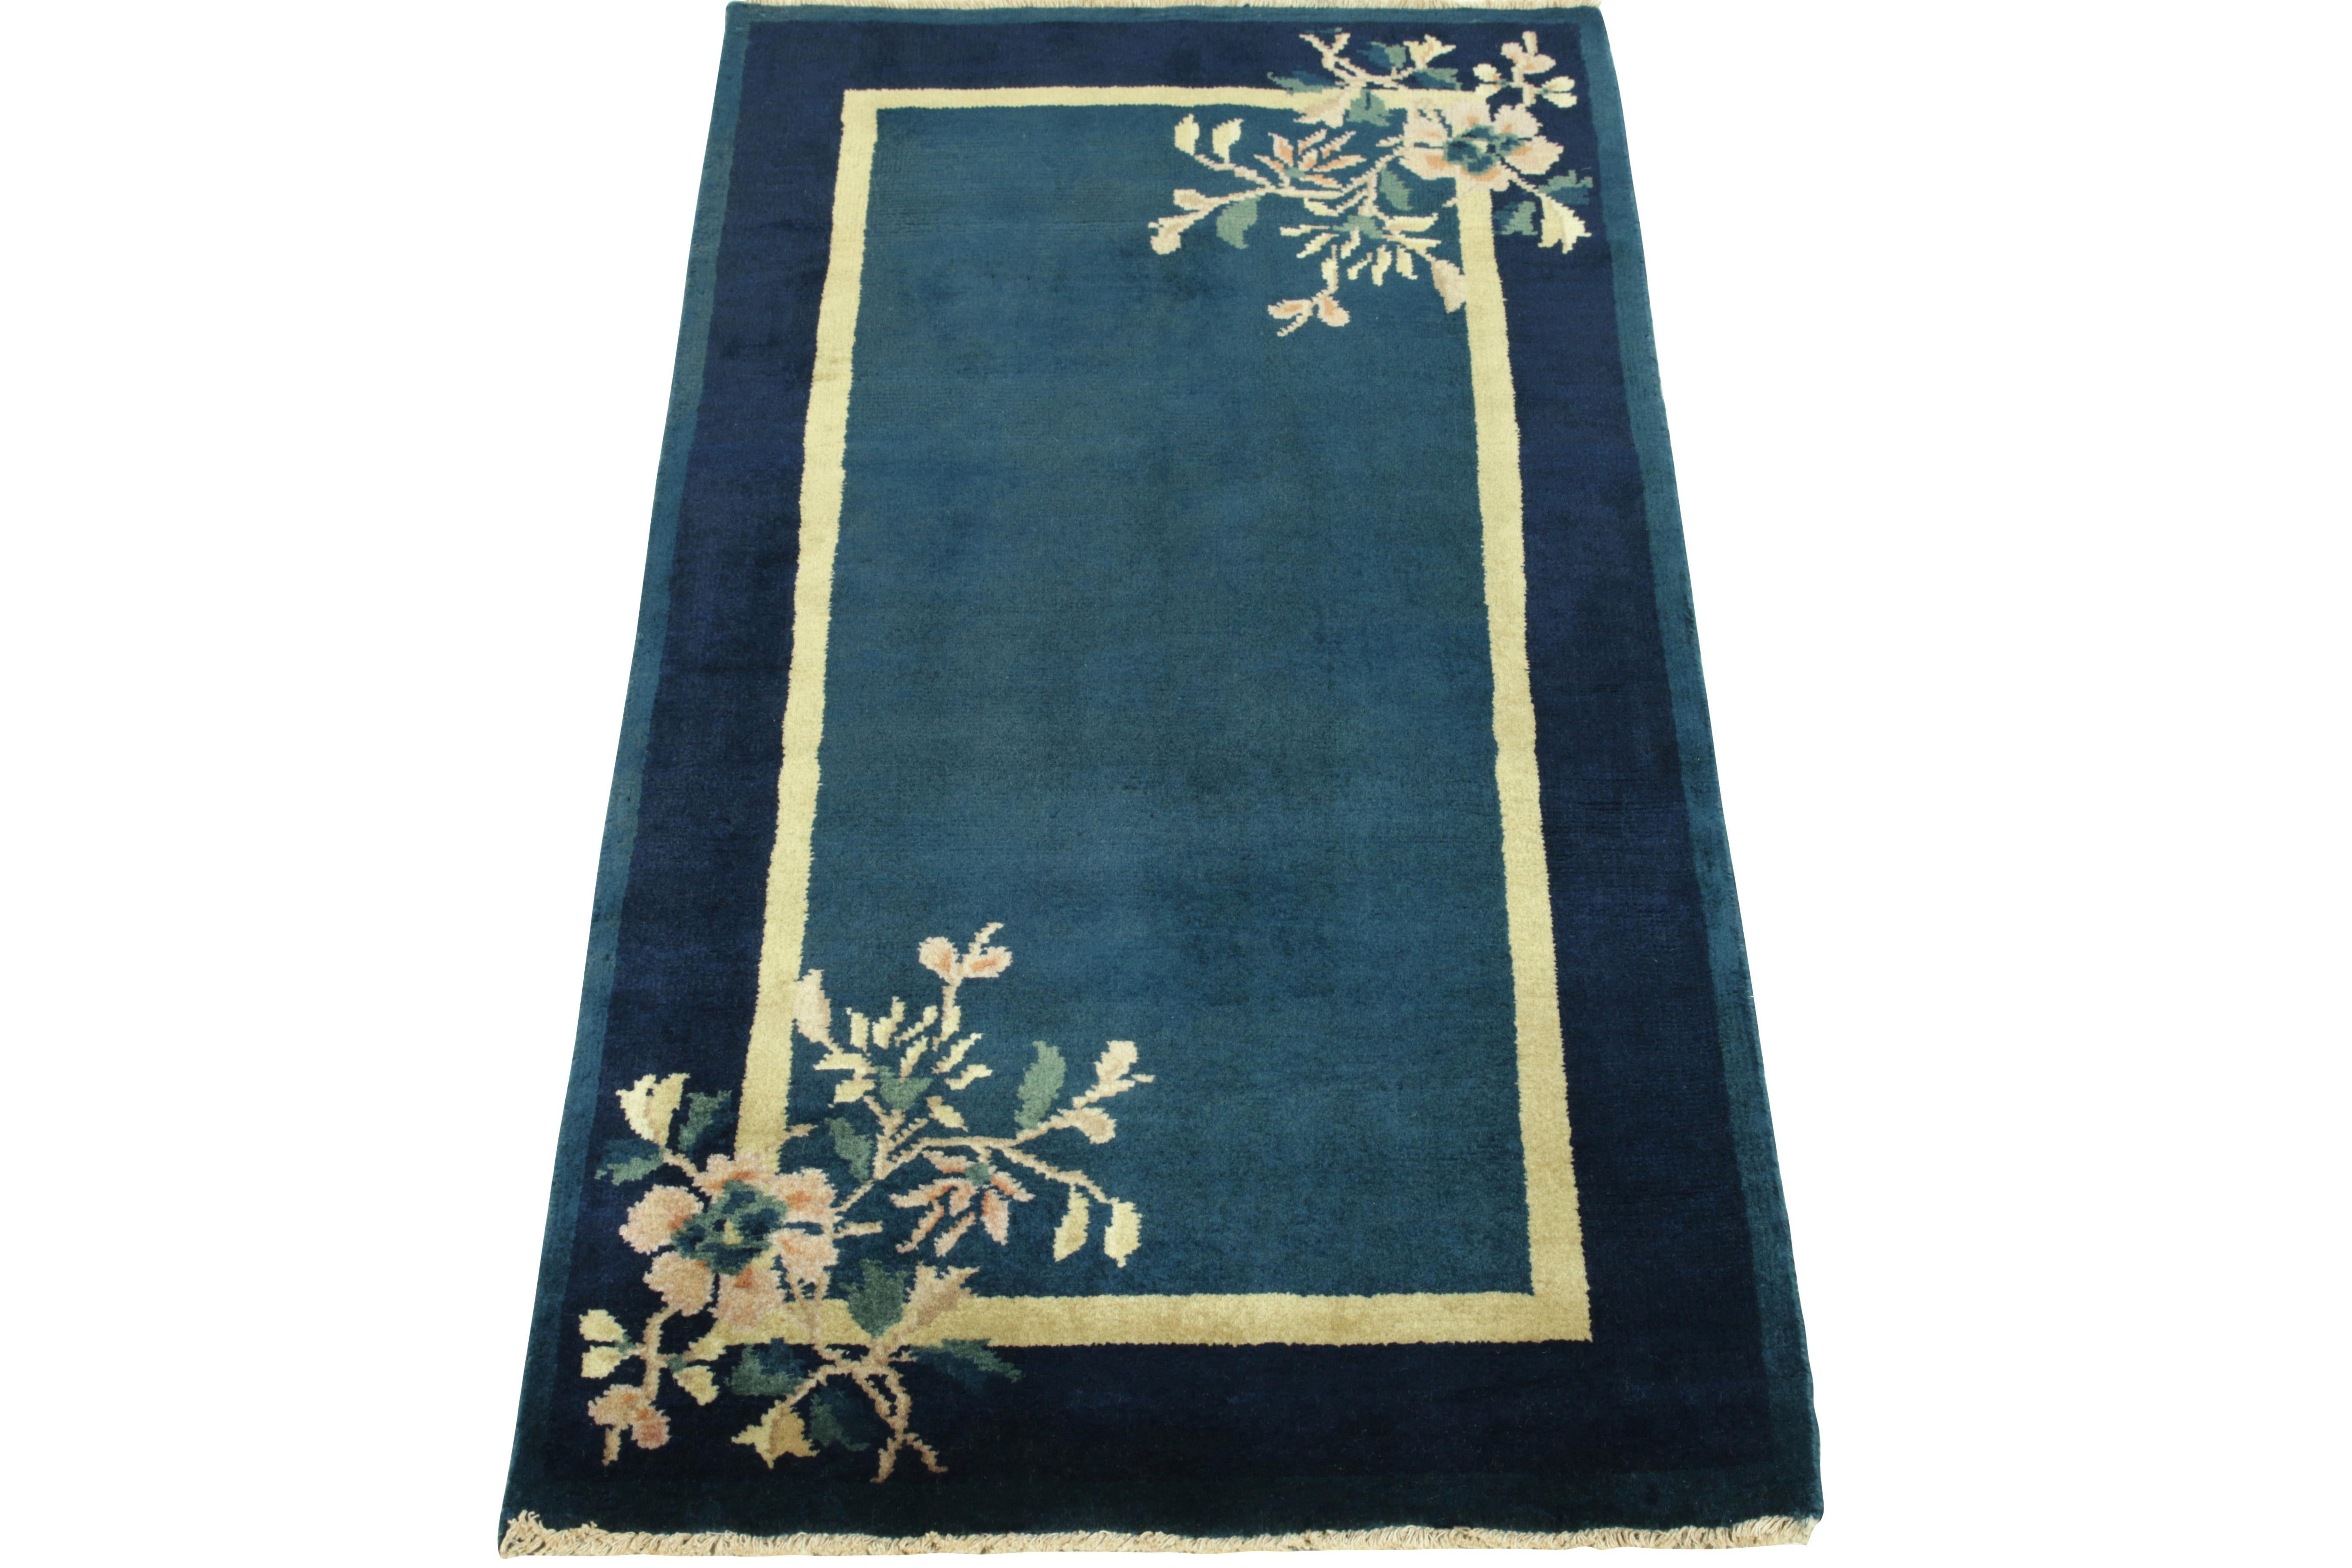 Enjoying blooming florals in teal, salmon & pastel yellow tones in the outer border, a Chinese Deco style vintage rug observing light-dark spots in blue tones connoting a very classic appeal of the 1920s. Further boasting a fine gold border